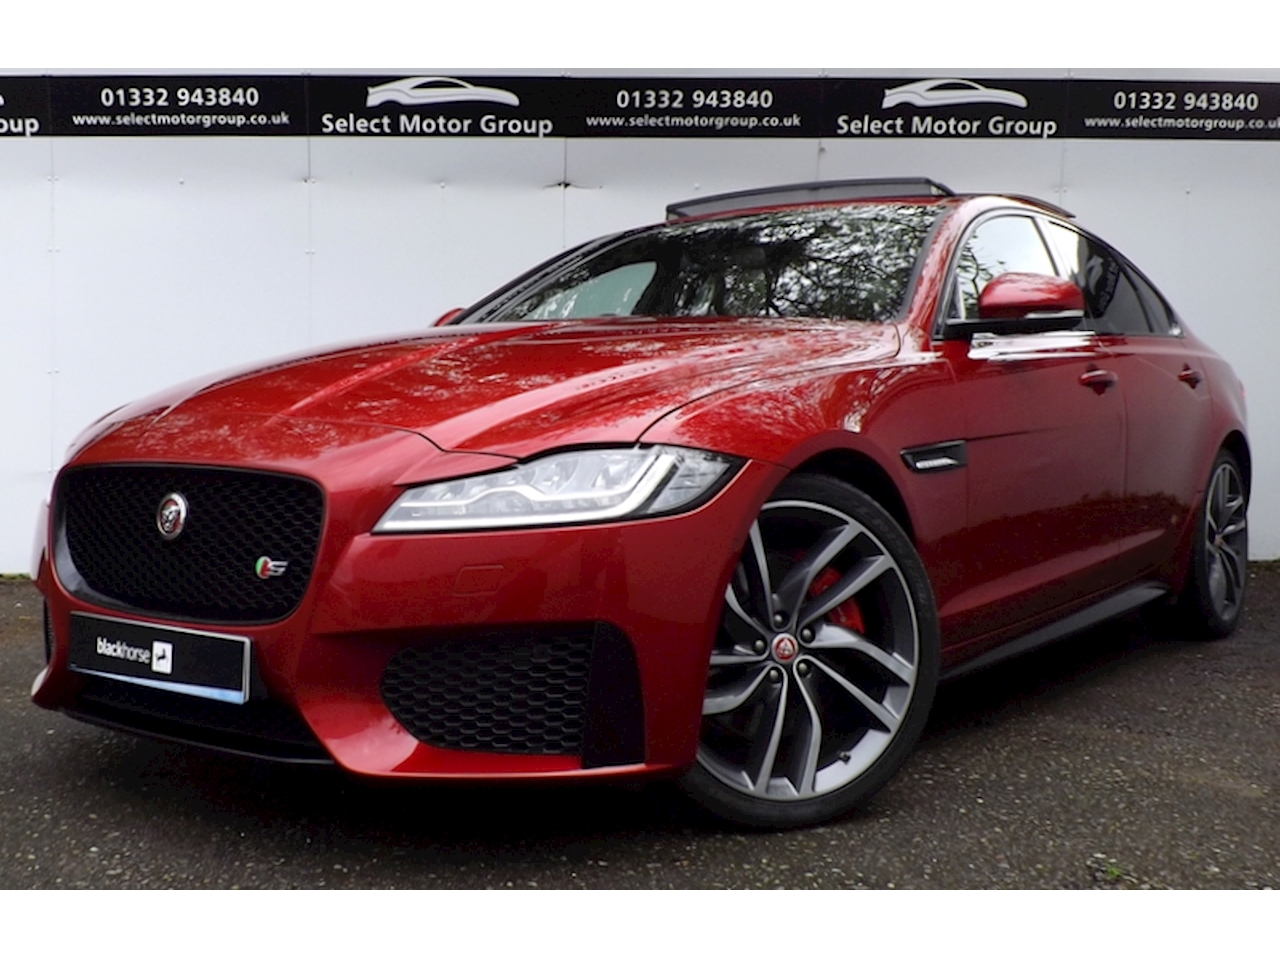 XF 3.0 D 300 V6 S 4dr Saloon Automatic Diesel